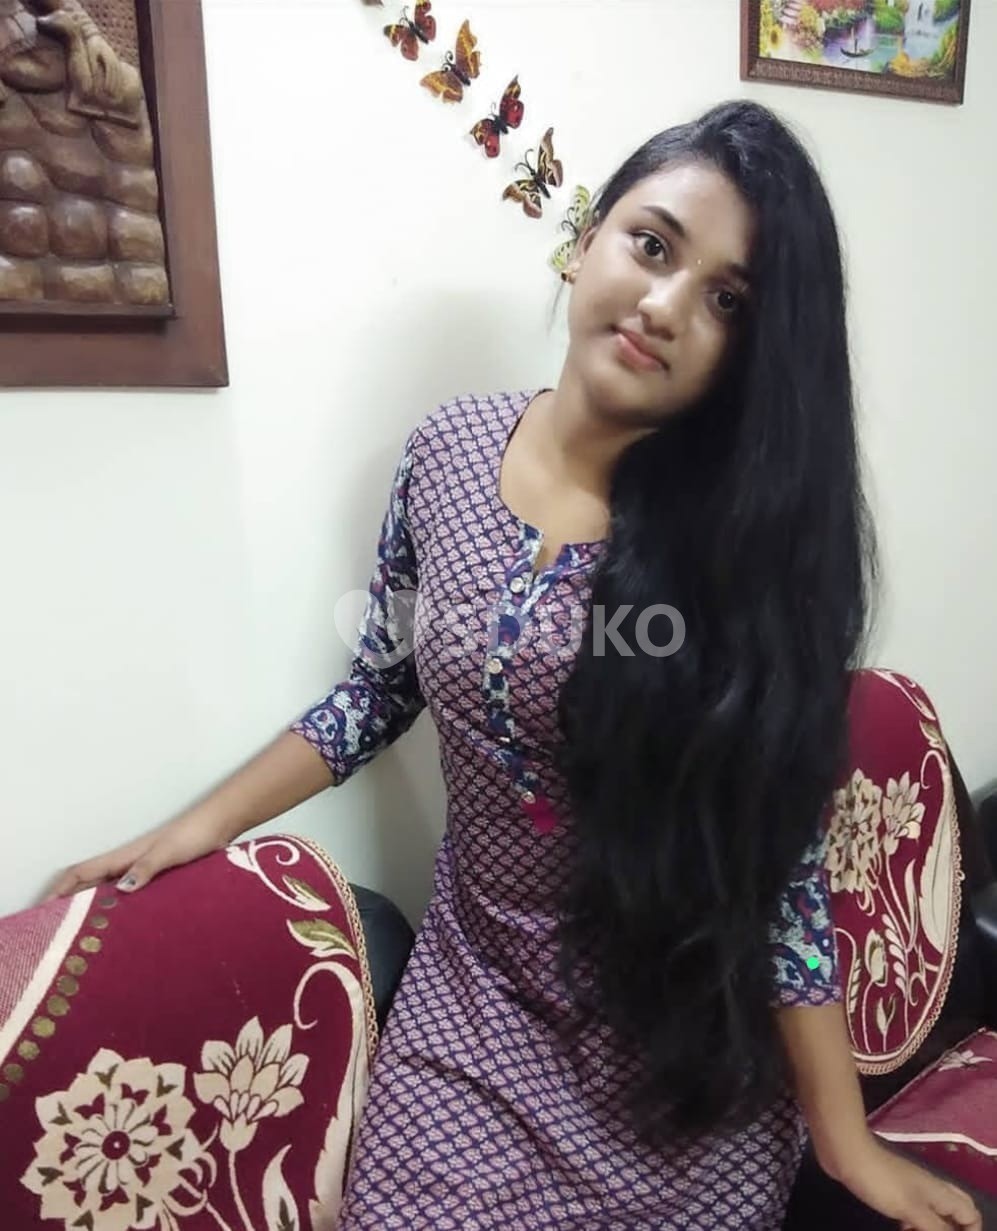 Barasat.low price 🥰 Myself Kavya 📞24 hours ⭐💗service available   AFFORDABLE AND CHEAPEST CALL GIRL SERVICE